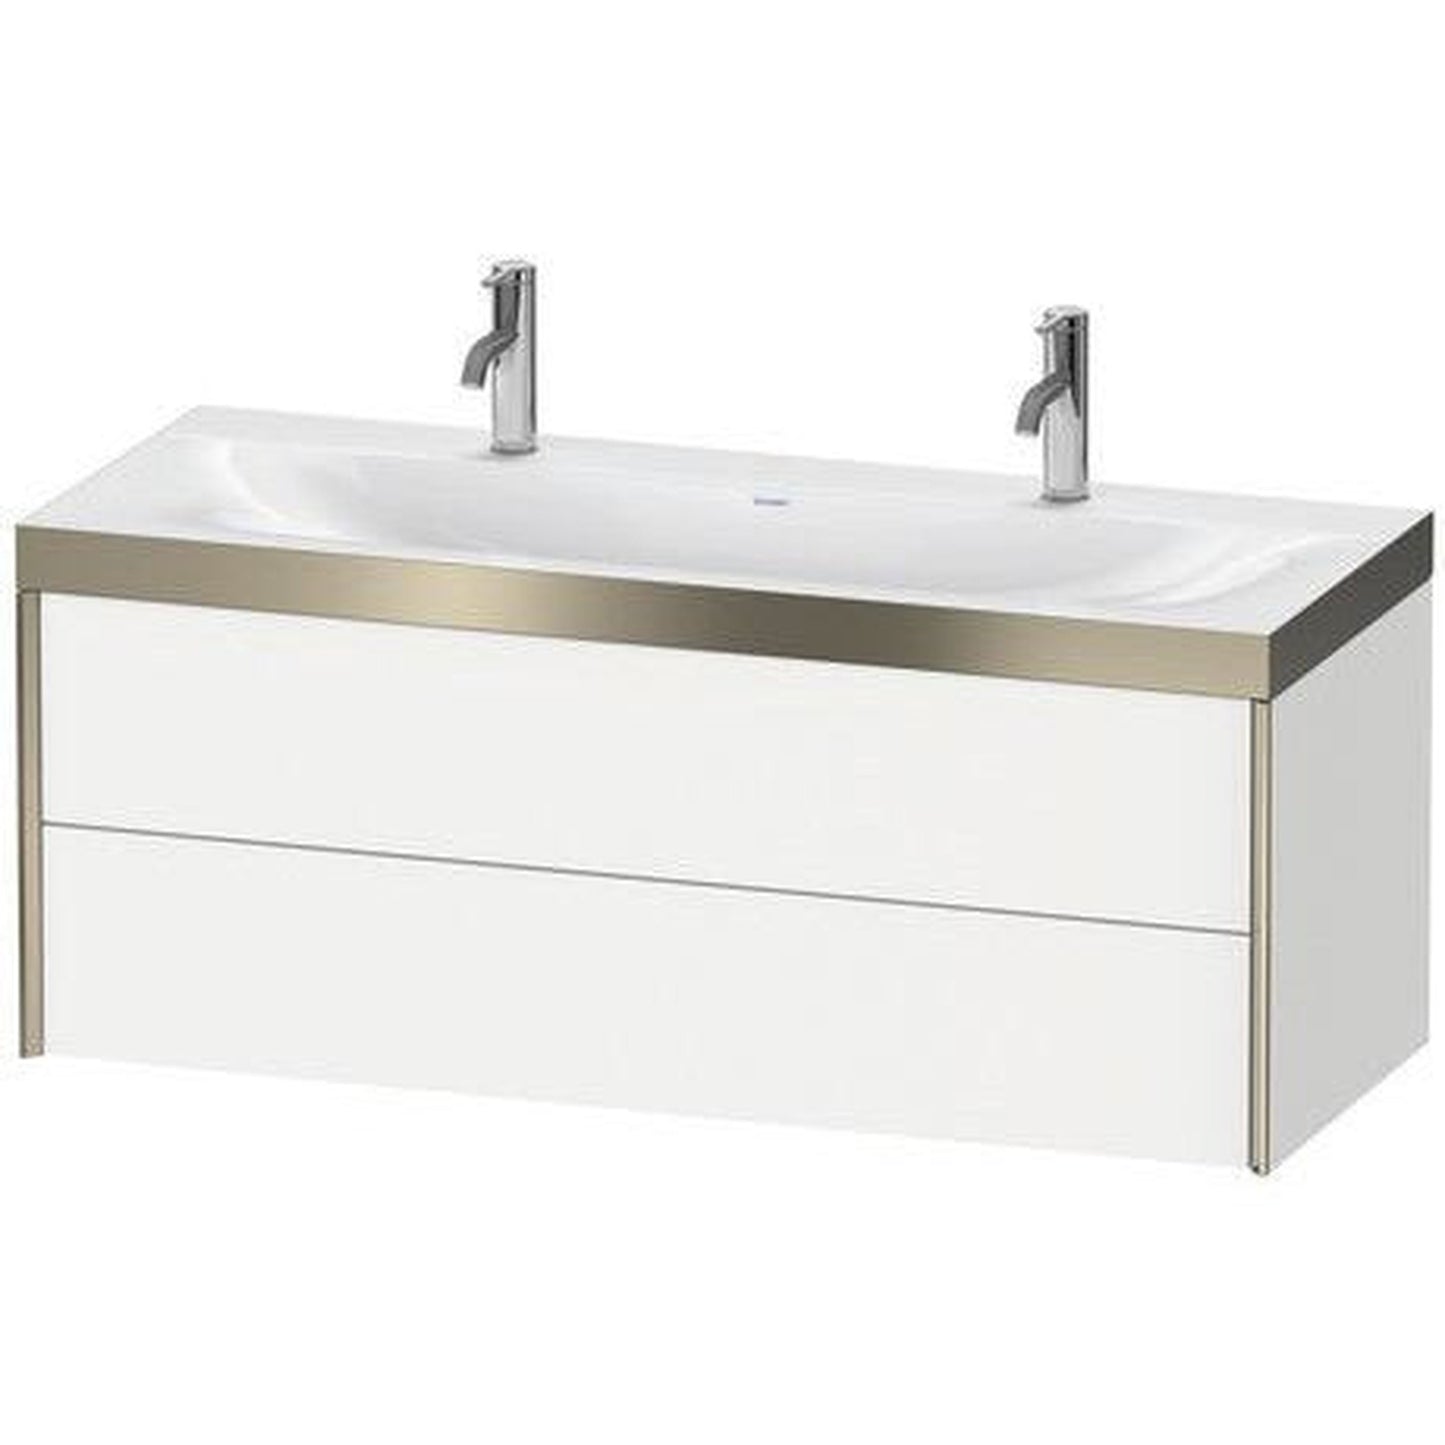 Duravit Xviu 47" x 20" x 19" Two Drawer C-Bonded Wall-Mount Vanity Kit With One Tap Hole, Dark Brushed Oak (XV4618OB172C)